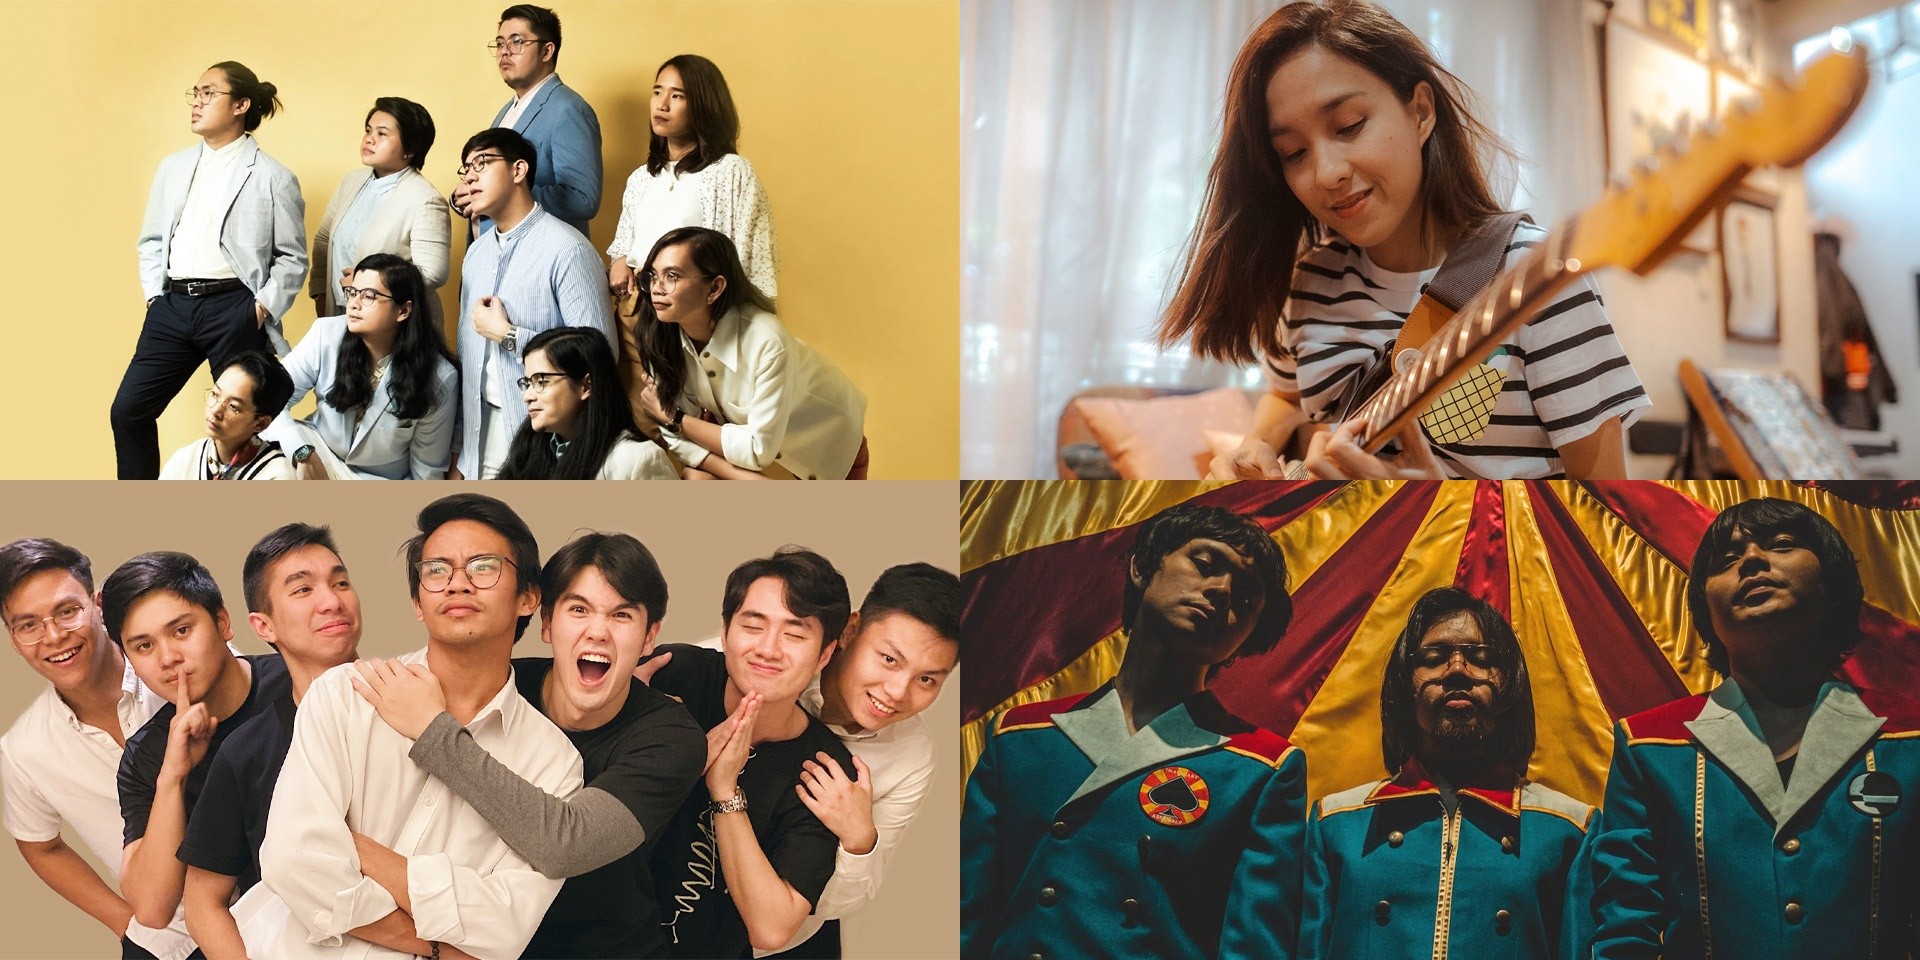 Ben&Ben, IV of Spades, Lola Amour, Barbie Almalbis, and more nominated at the 33rd Awit Awards